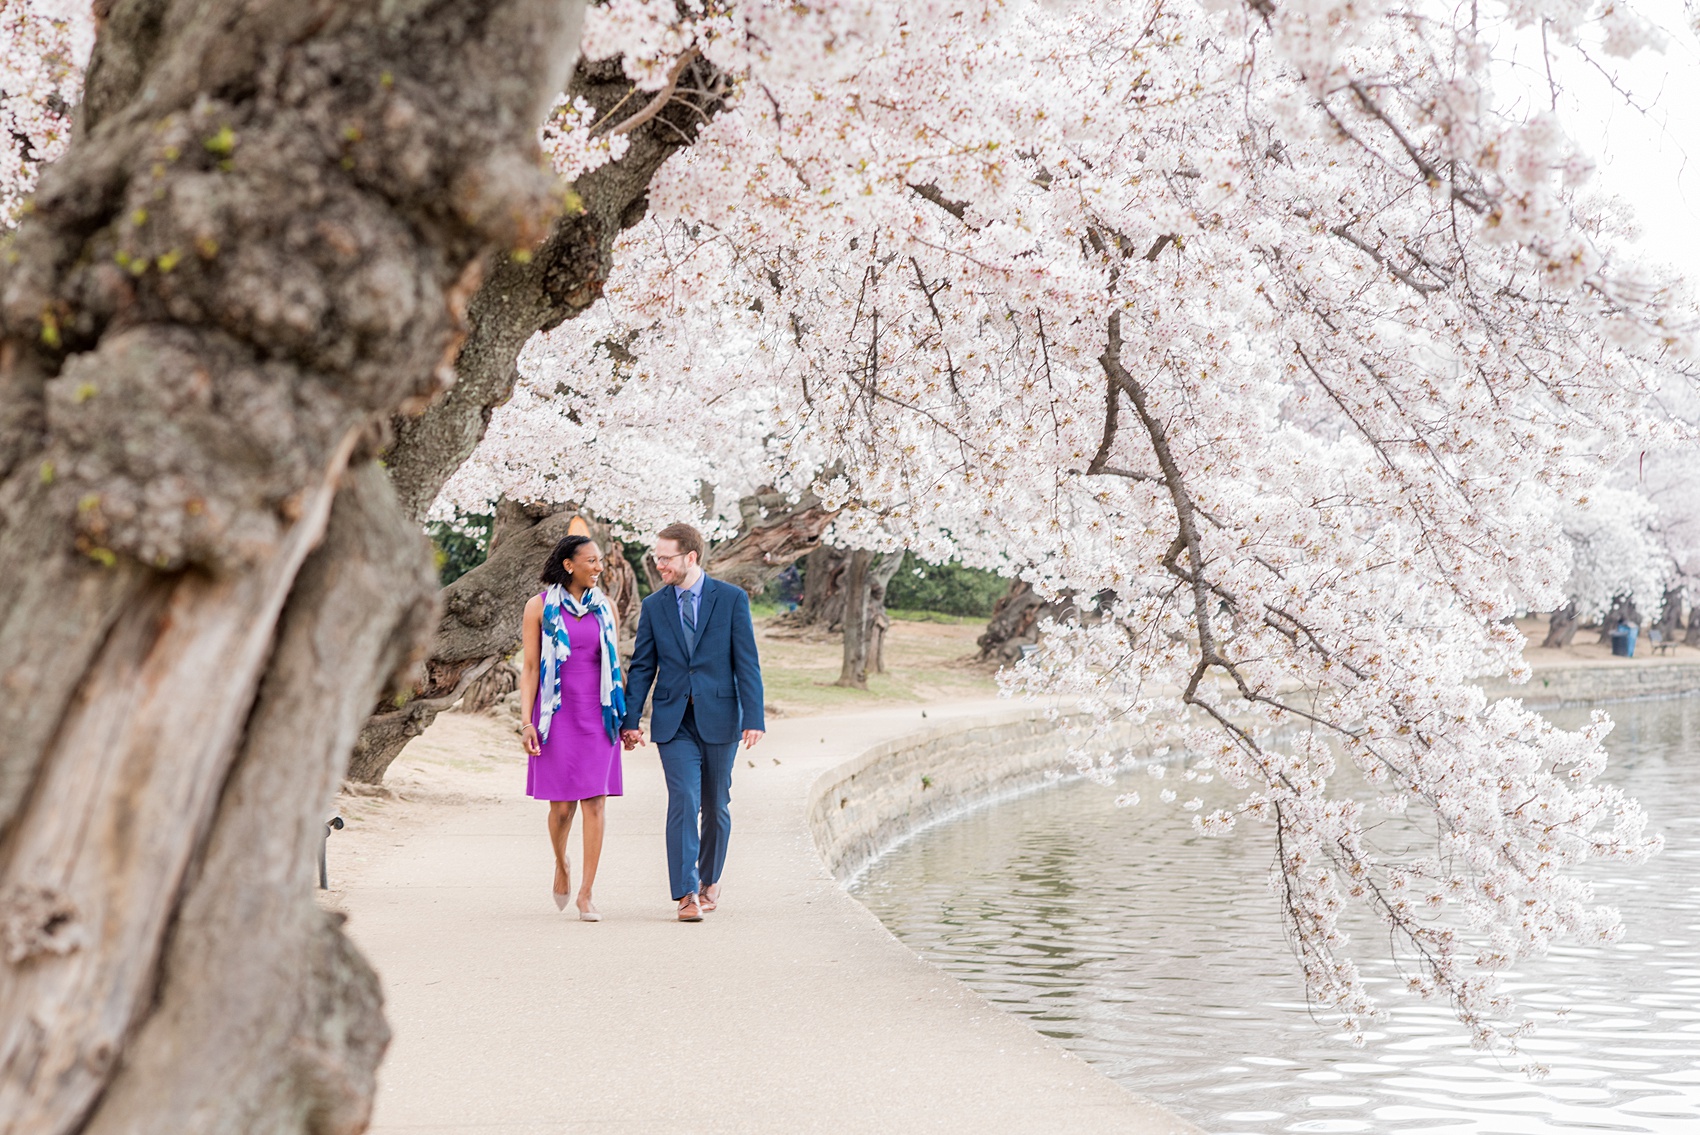 DC Cherry Blossoms Engagement Photos by Mikkel Paige Photography. Spring flowers around the Tidal Basin at the nation's Capitol with an interracial couple in colorful outfits. #DCCherryBlossoms #CherryBlossoms #EngagementPhotos #SpringEngagementPhotos #CherryBlossomsEngagementPhotos